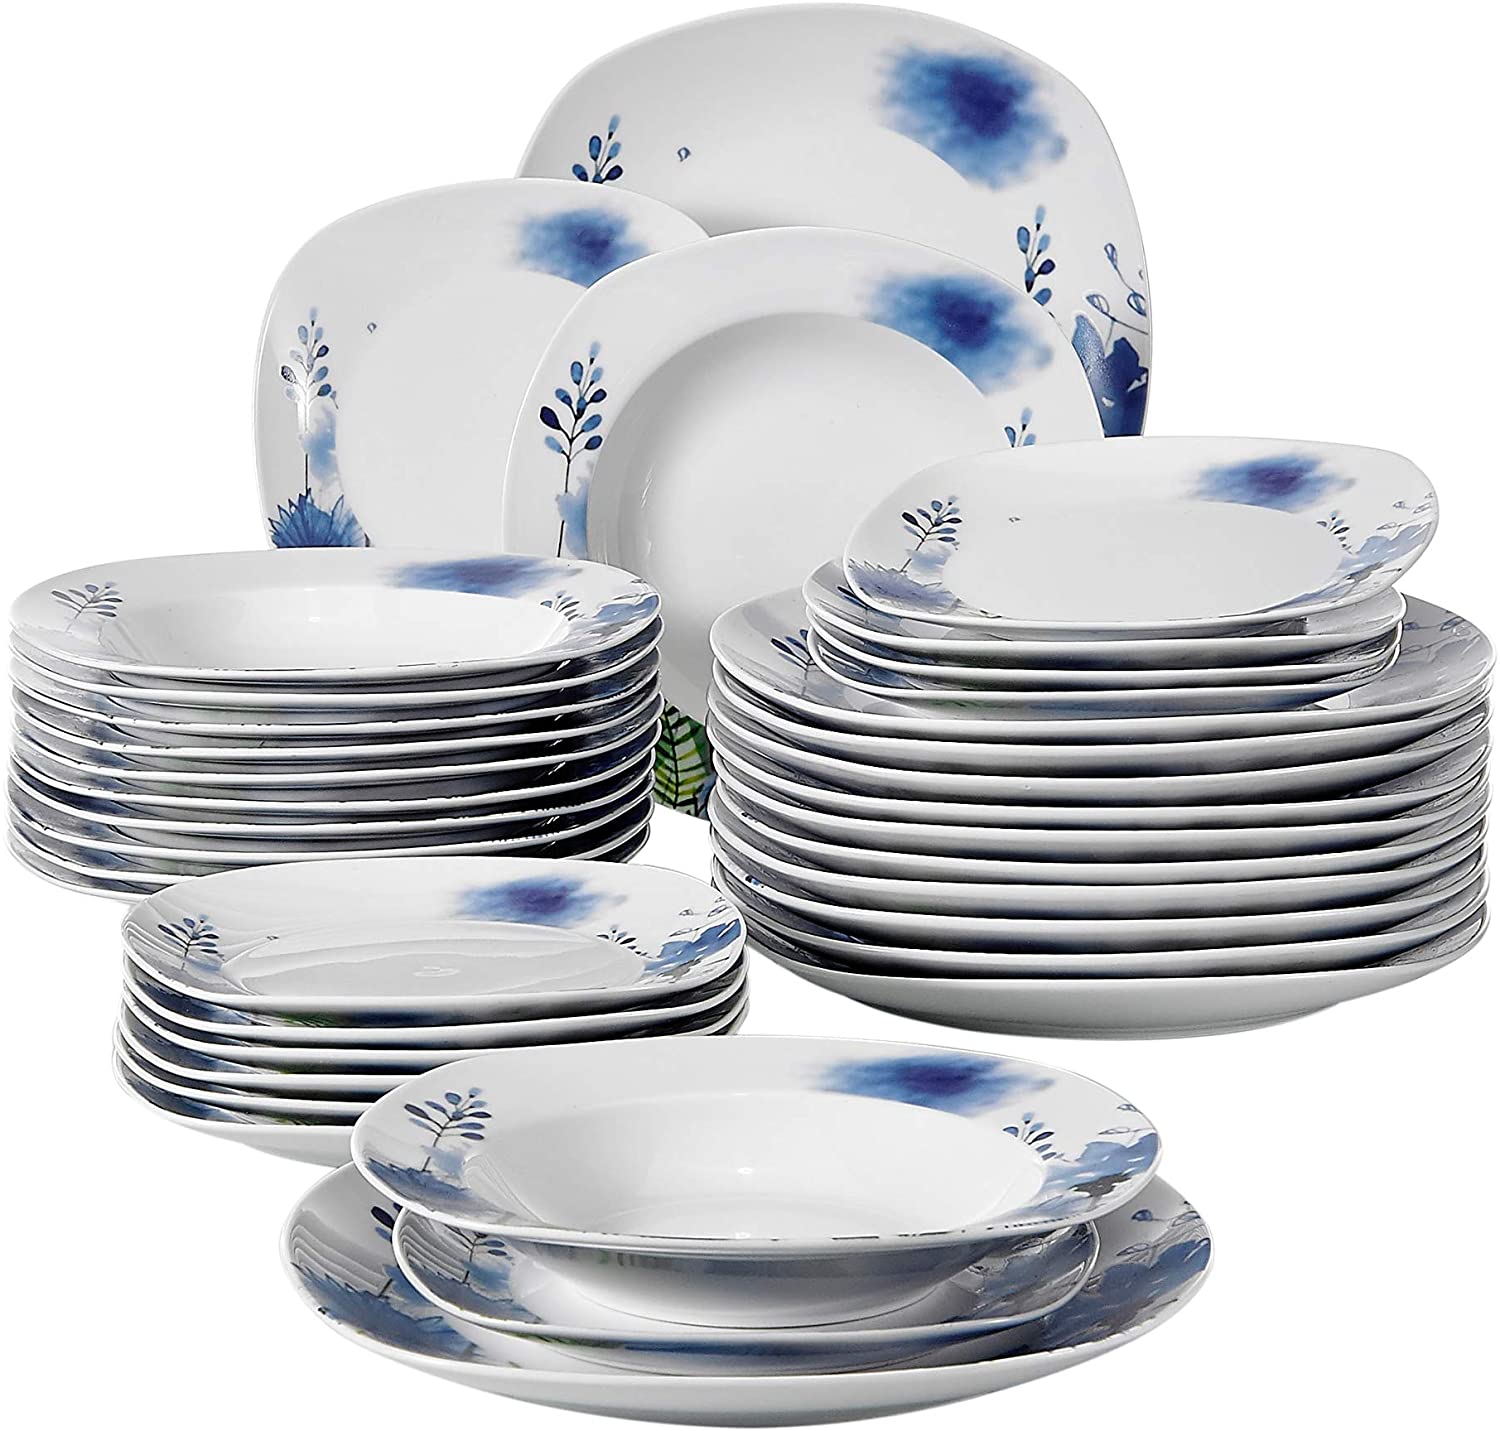 Veweet Laura Porcelain Dinner Set 36 Pieces / 48 Pieces Crockery Set Including Cereal Bowls, Dessert Plates, Dinner Plates and Soup Plates, Tableware Set for 6/12 People